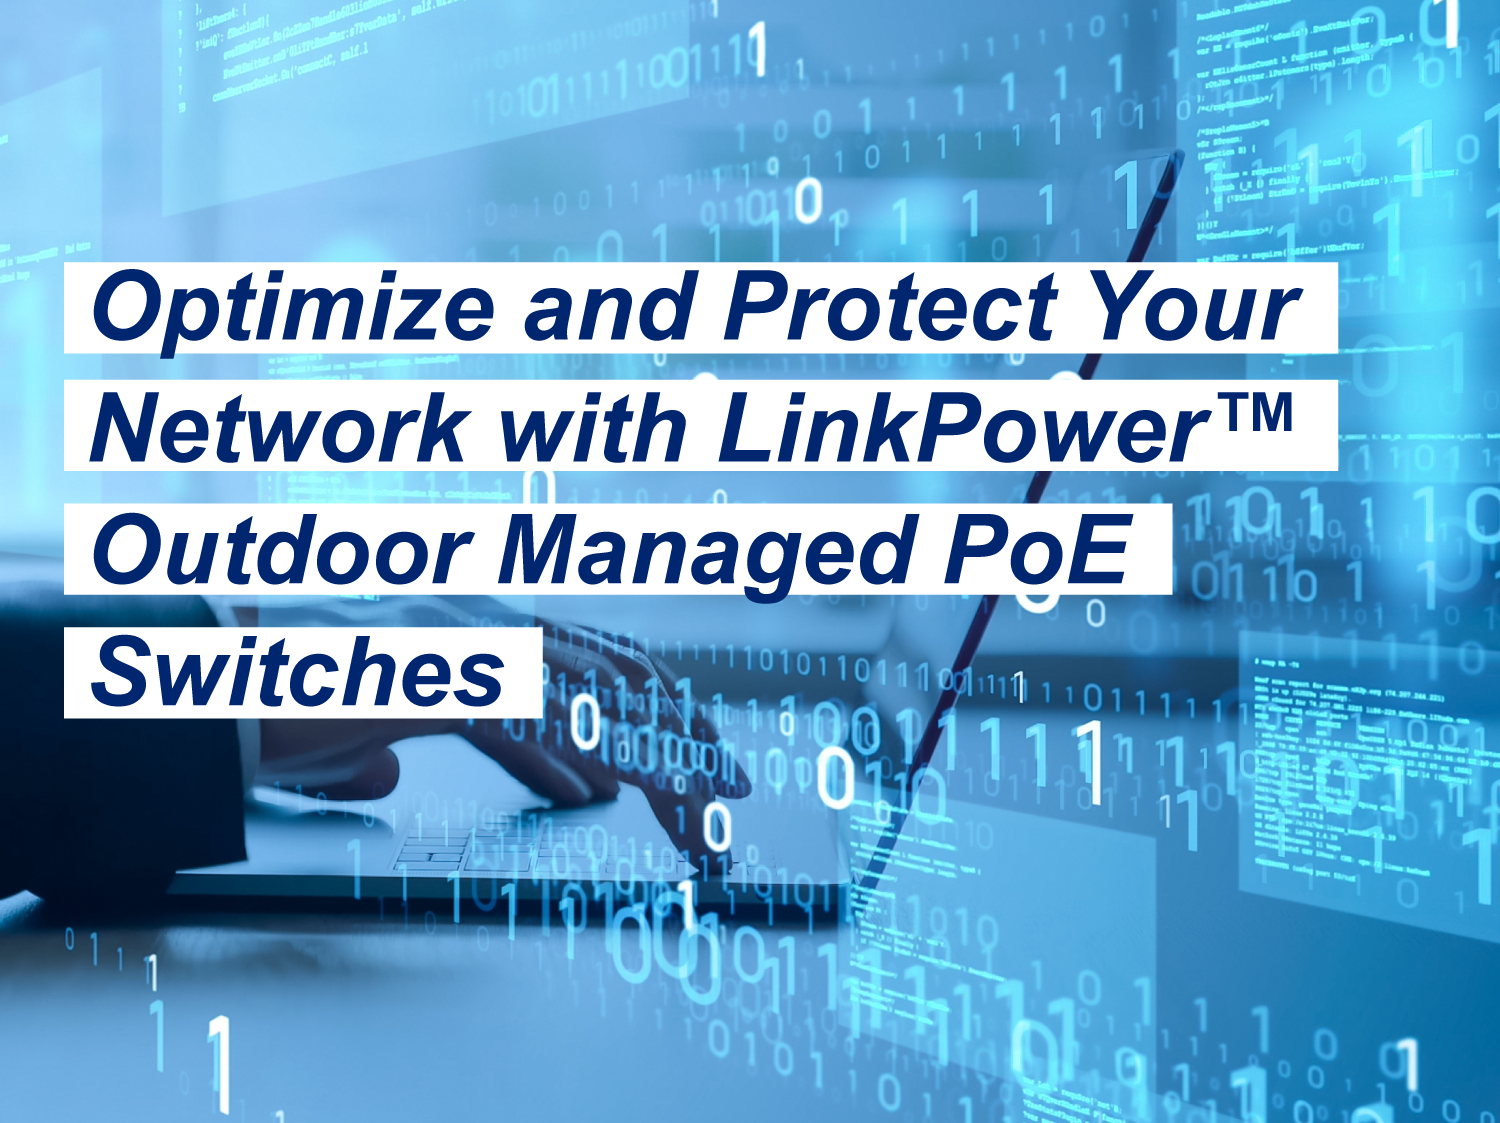 Optimize and Protect Your Network with LinkPower™ Outdoor Managed PoE Switches